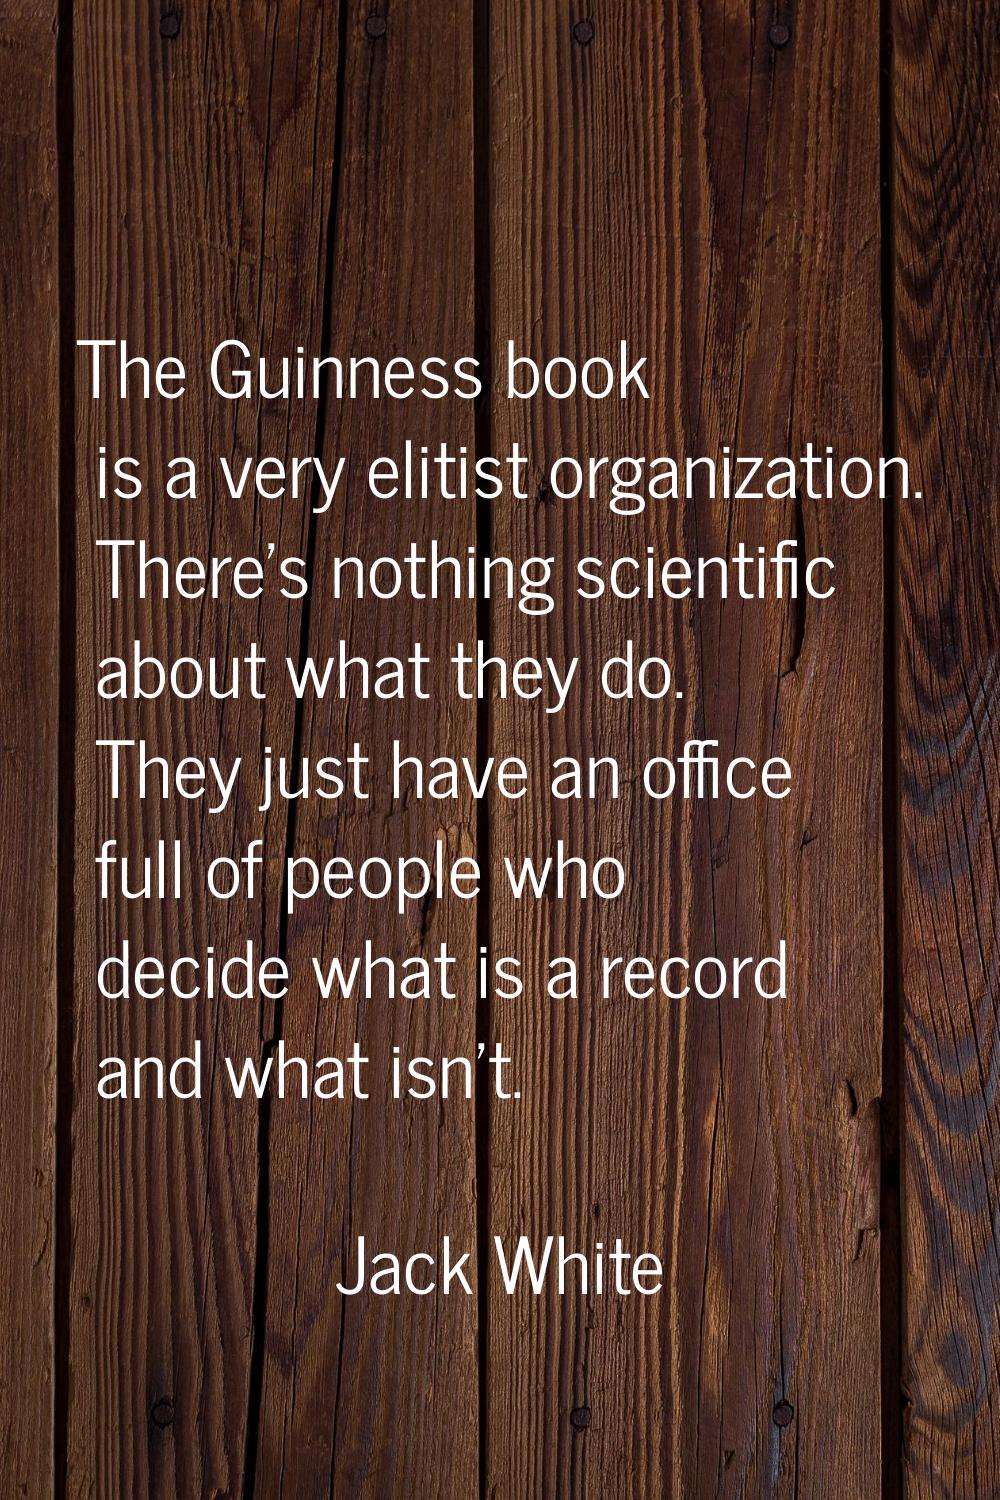 The Guinness book is a very elitist organization. There's nothing scientific about what they do. Th